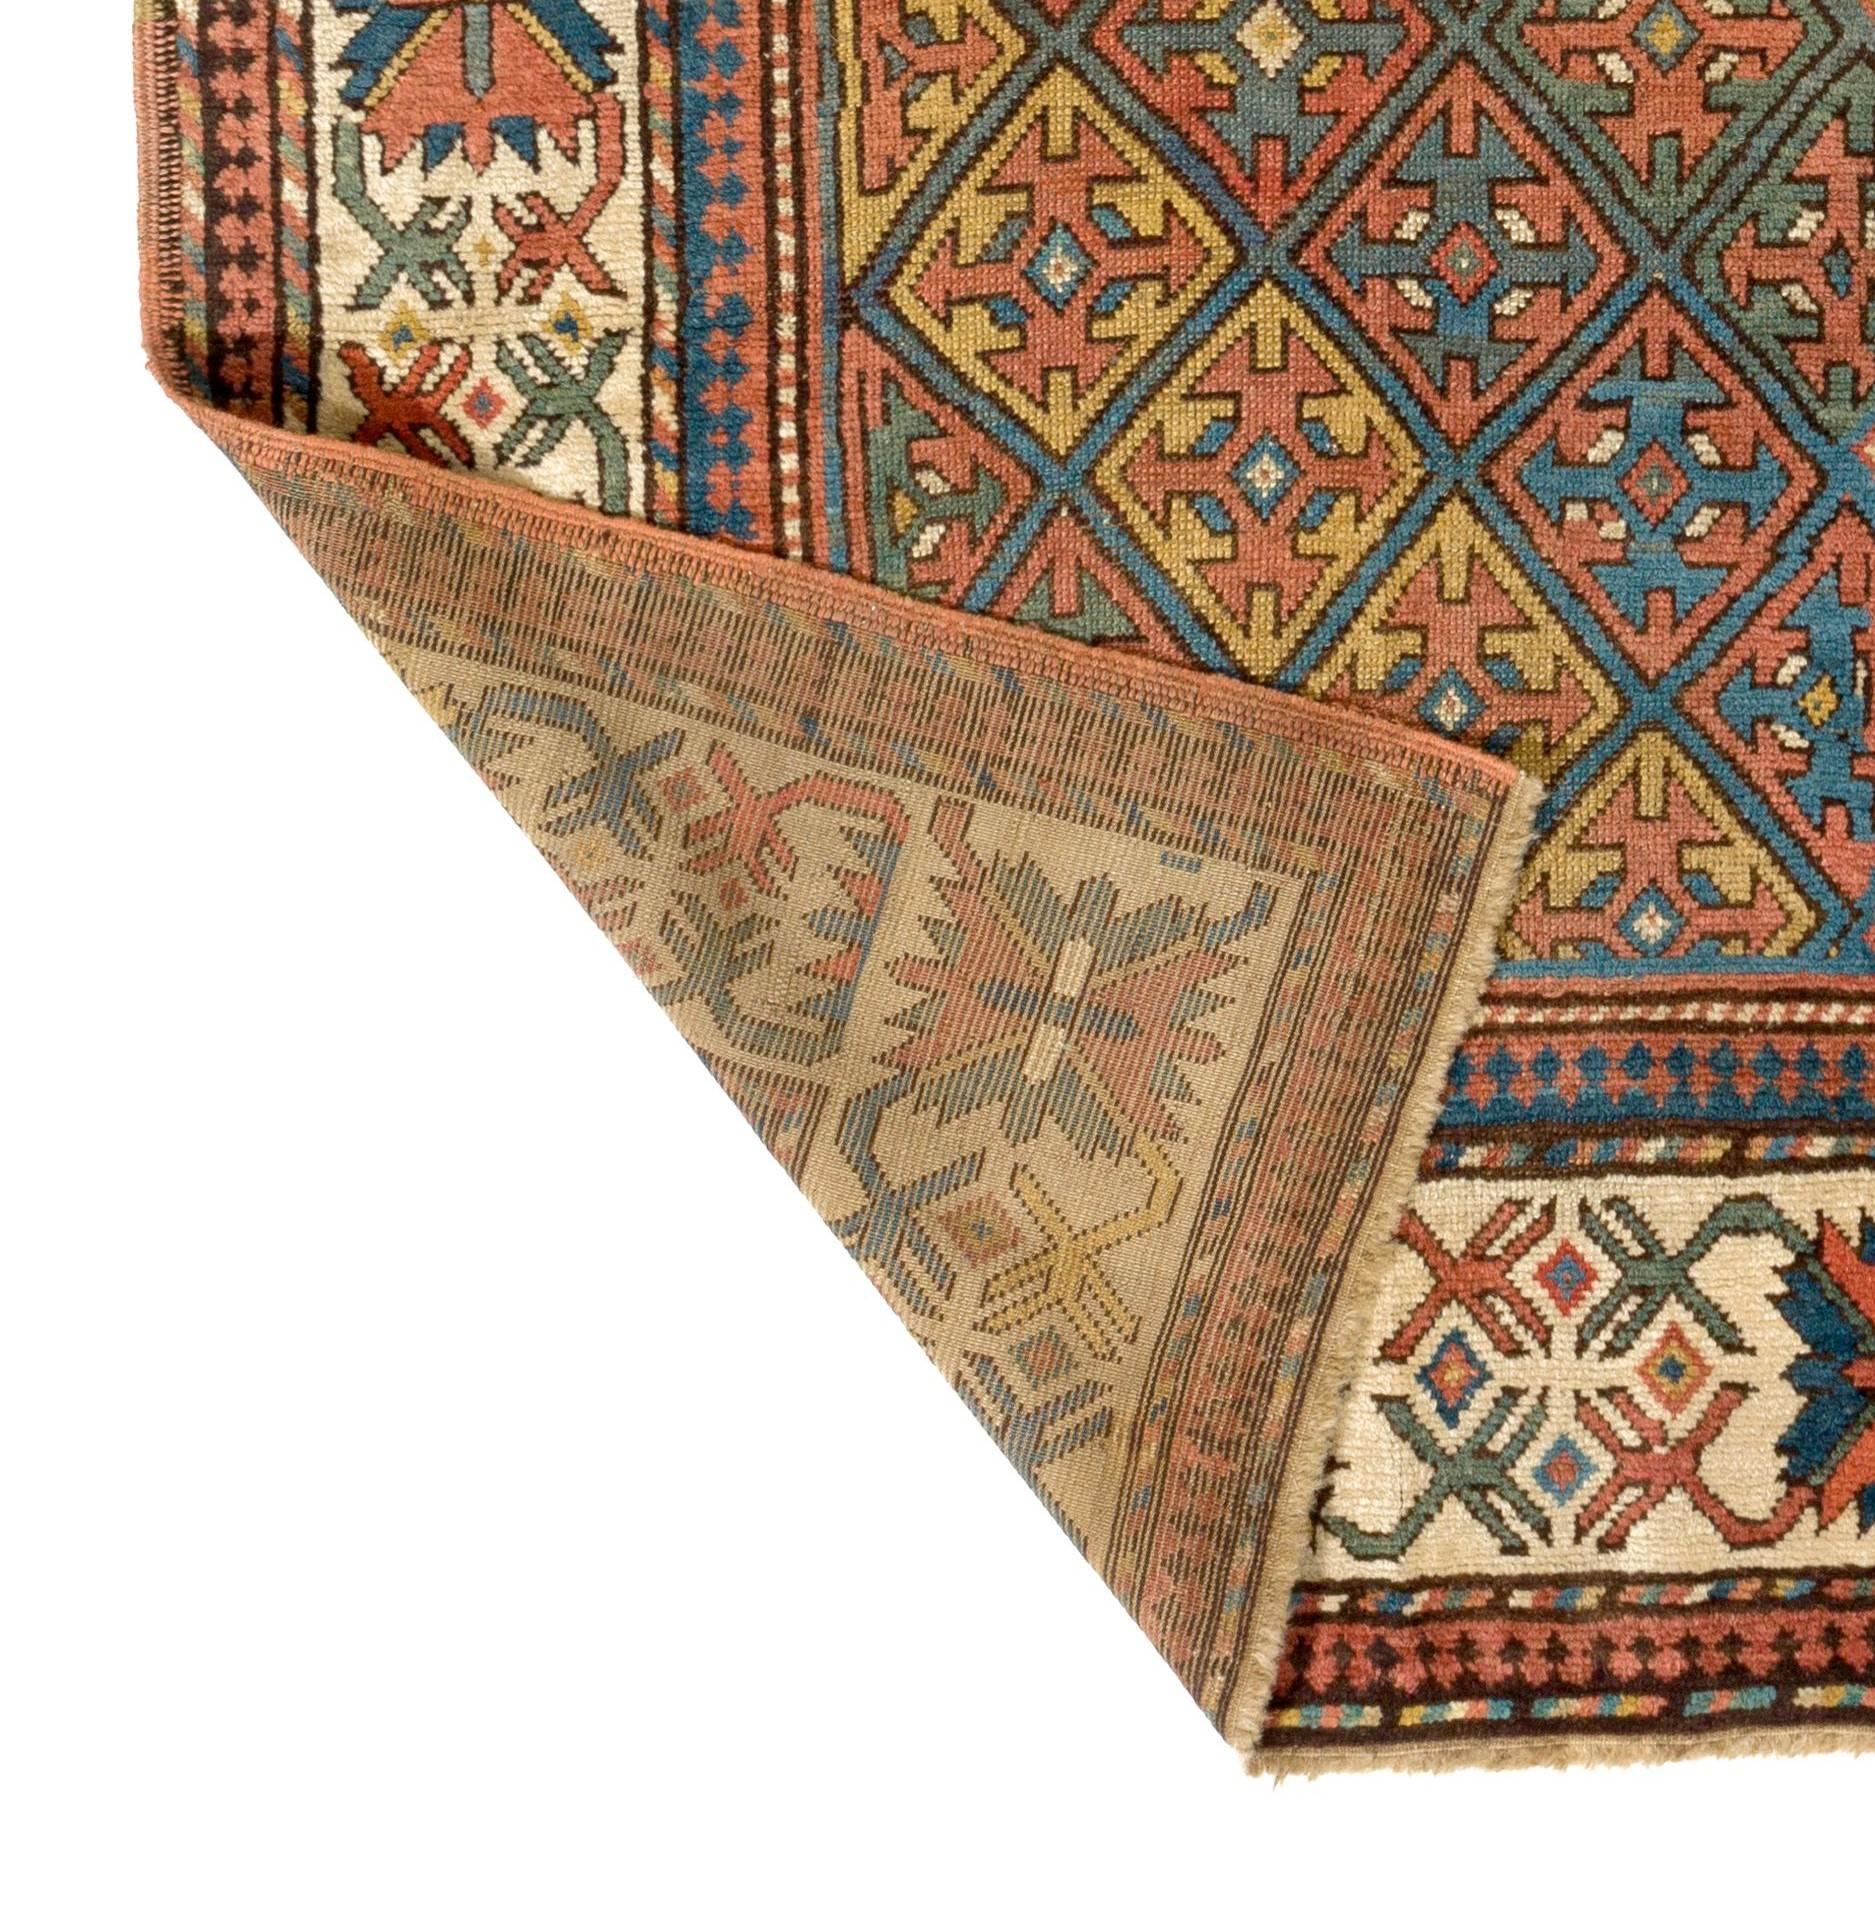 19th Century 4x7.4 Ft Antique Caucasian Armenian Kazak Rug, 100% Wool & All Natural Dyes For Sale